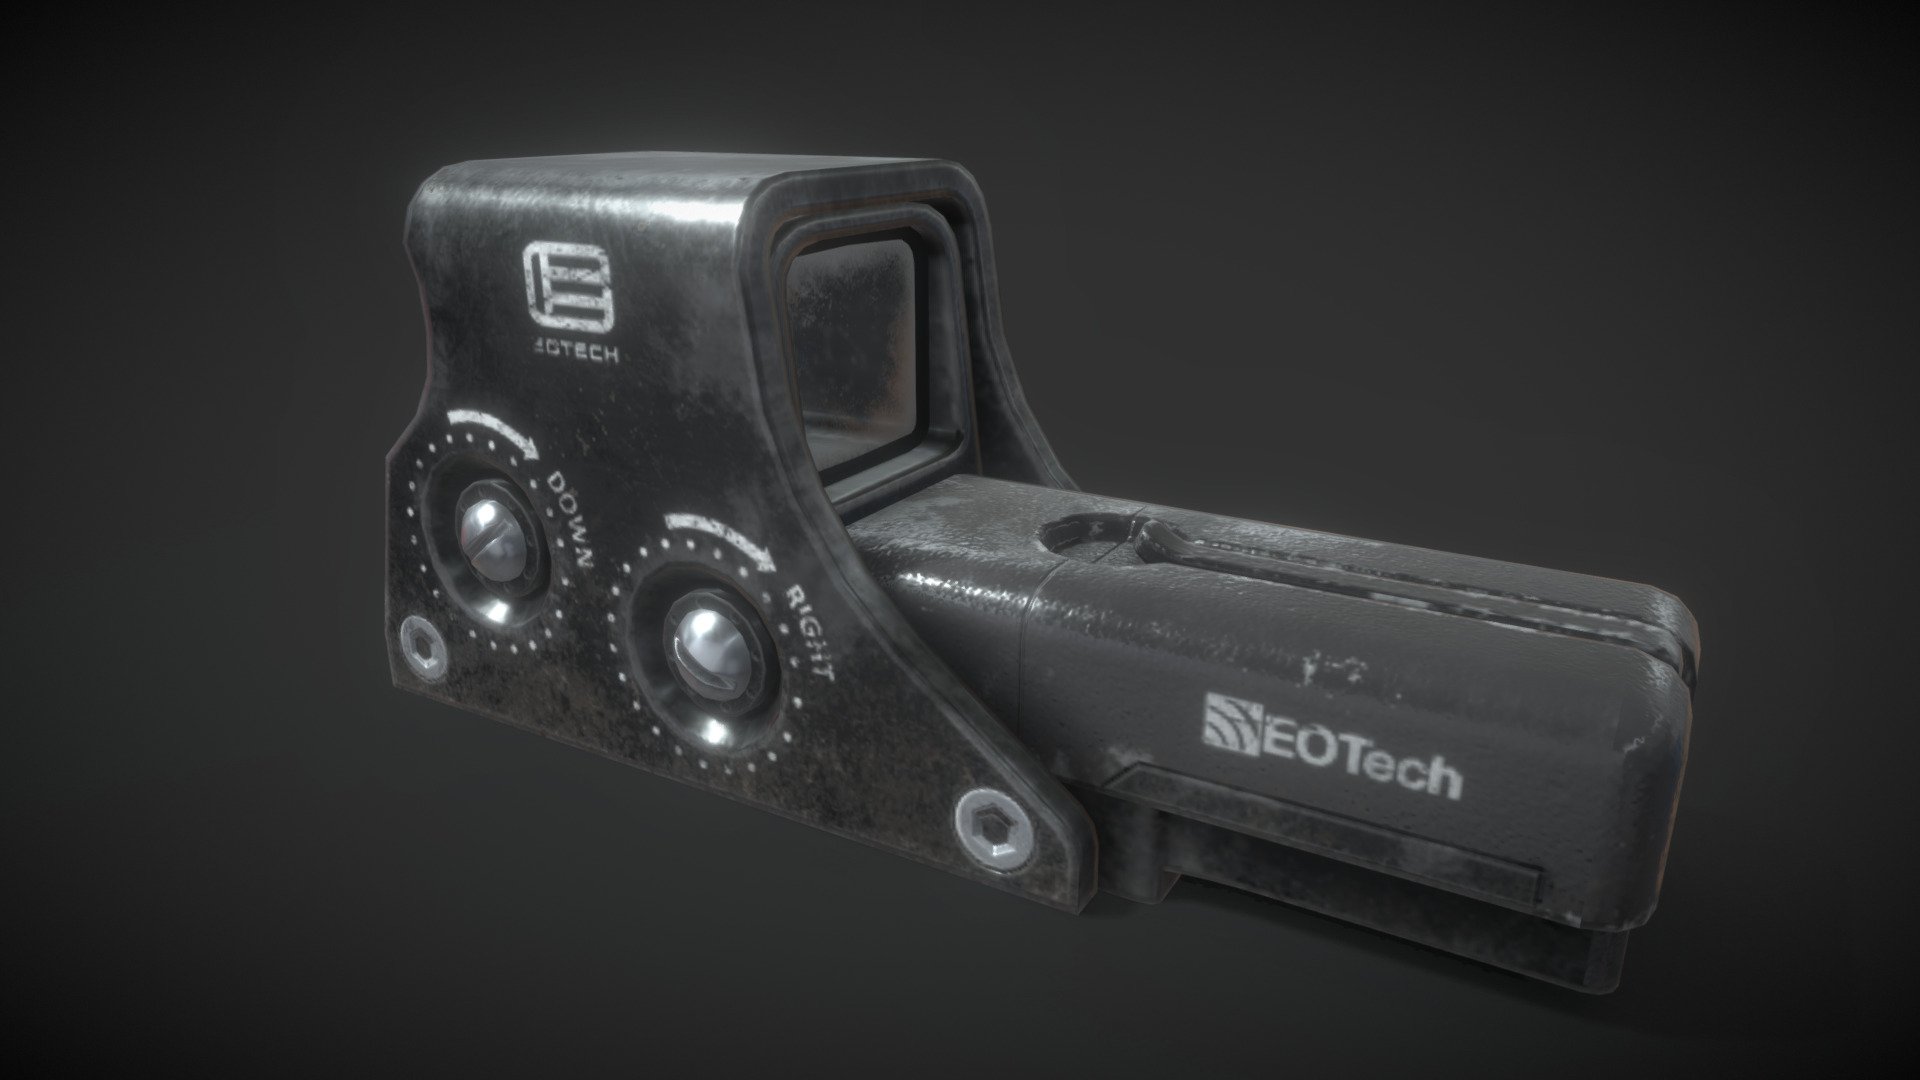 Modeling in Blender 2.79, texturing in substance painter 2.0 
Made for game model and use 1024 texture for faster performance - EO-Tech 512 Holo_Sight - 3D model by Michael Karel (@michaelkarel) 3d model